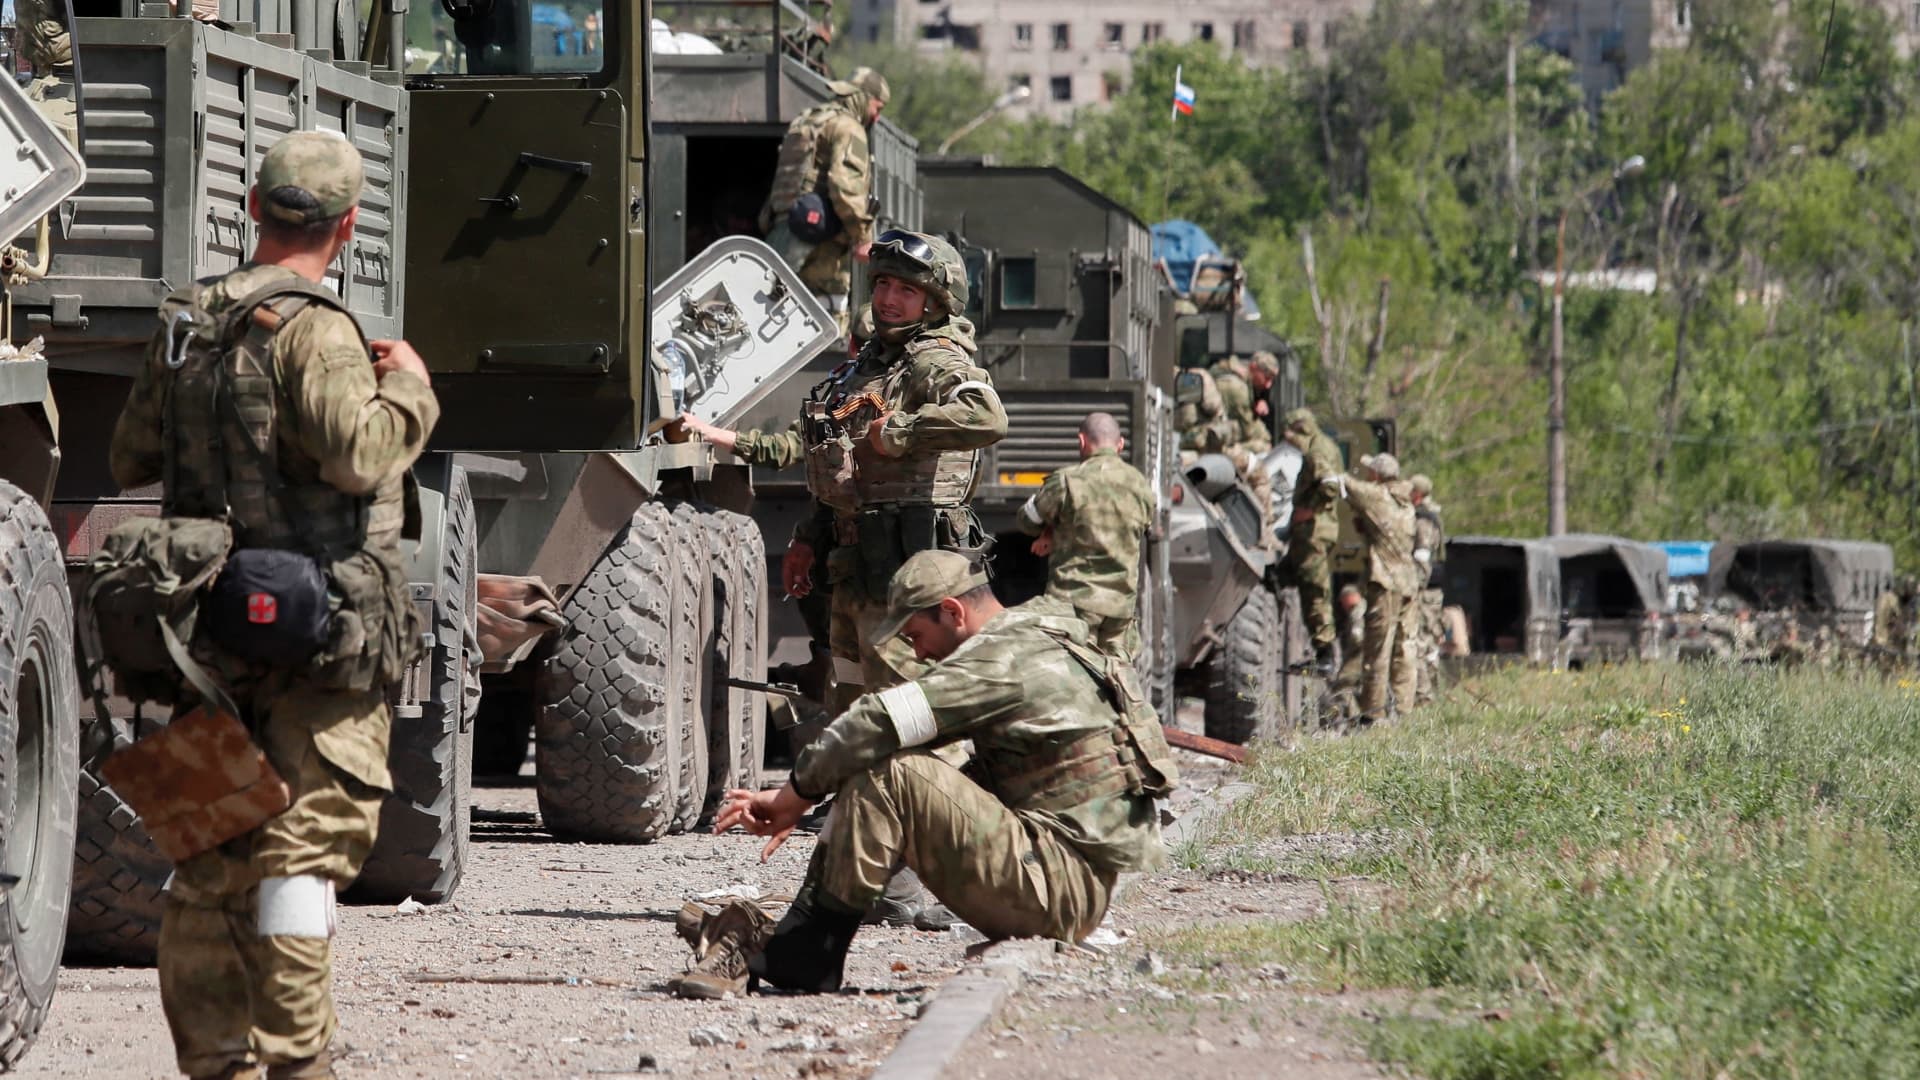 A convoy of pro-Russian troops is seen before the expected evacuation of wounded Ukrainian soldiers from the besieged Azovstal steel mill in the course of Ukraine-Russia conflict in Mariupol, Ukraine May 16, 2022.